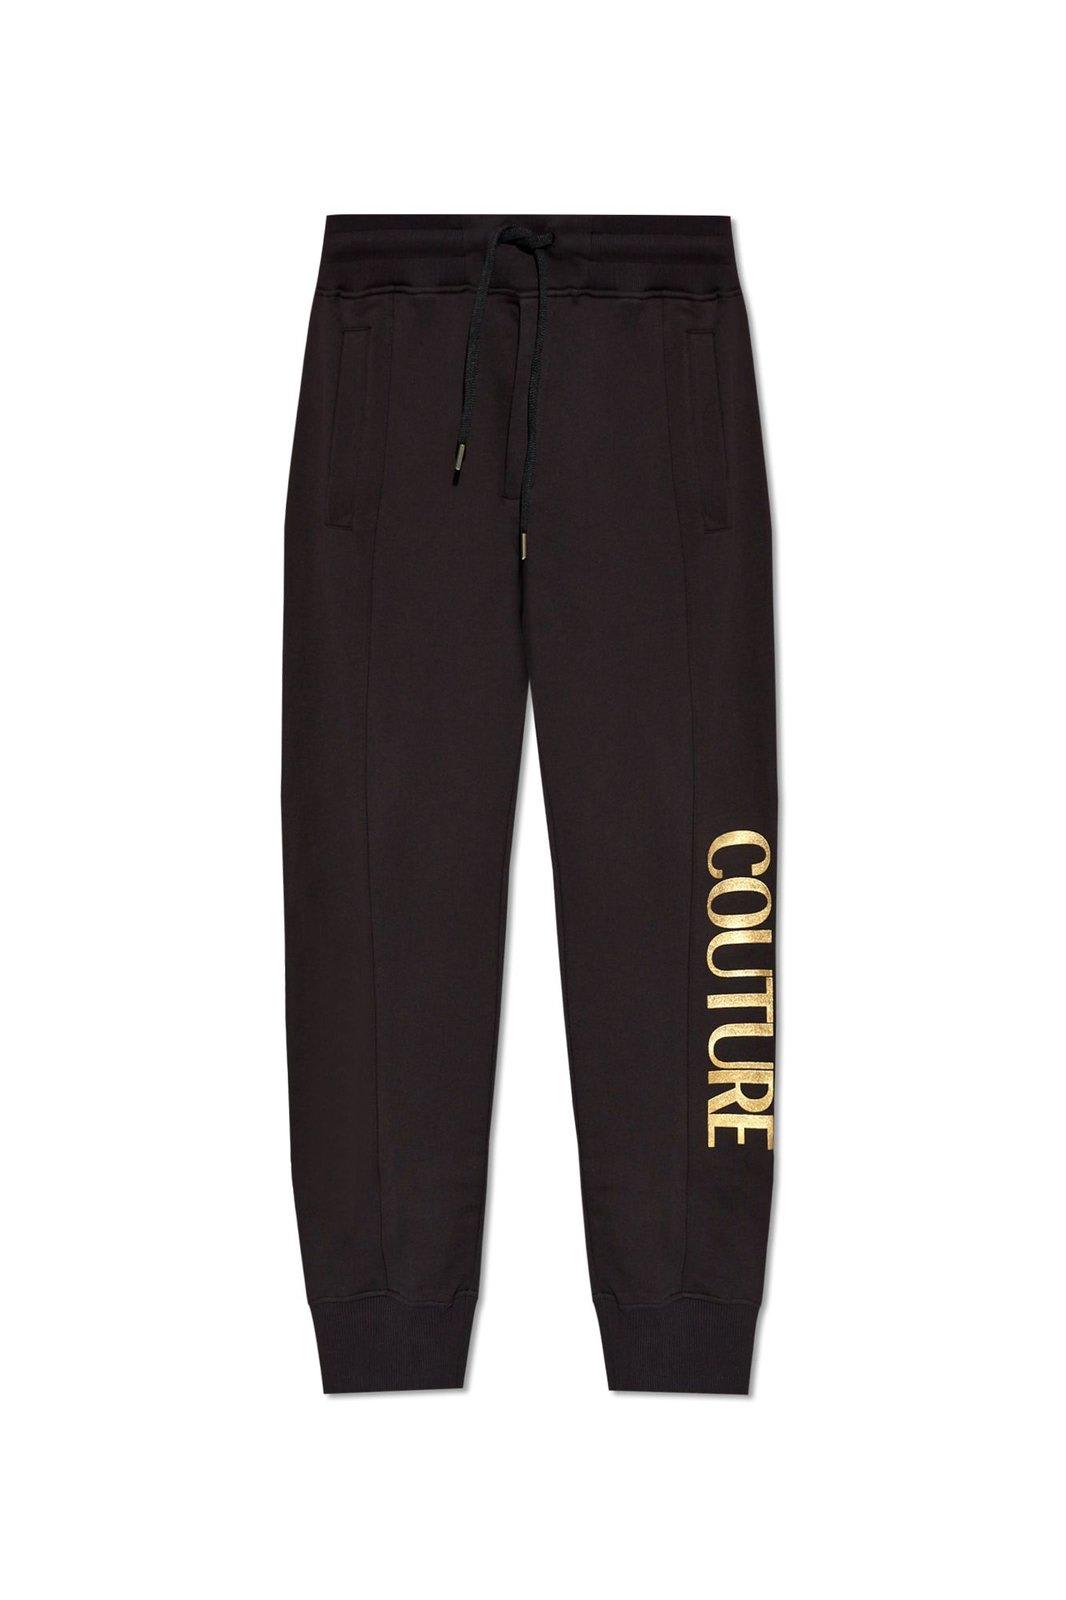 VERSACE JEANS COUTURE LOGO PRINTED DRAWSTRING TRACK PANTS